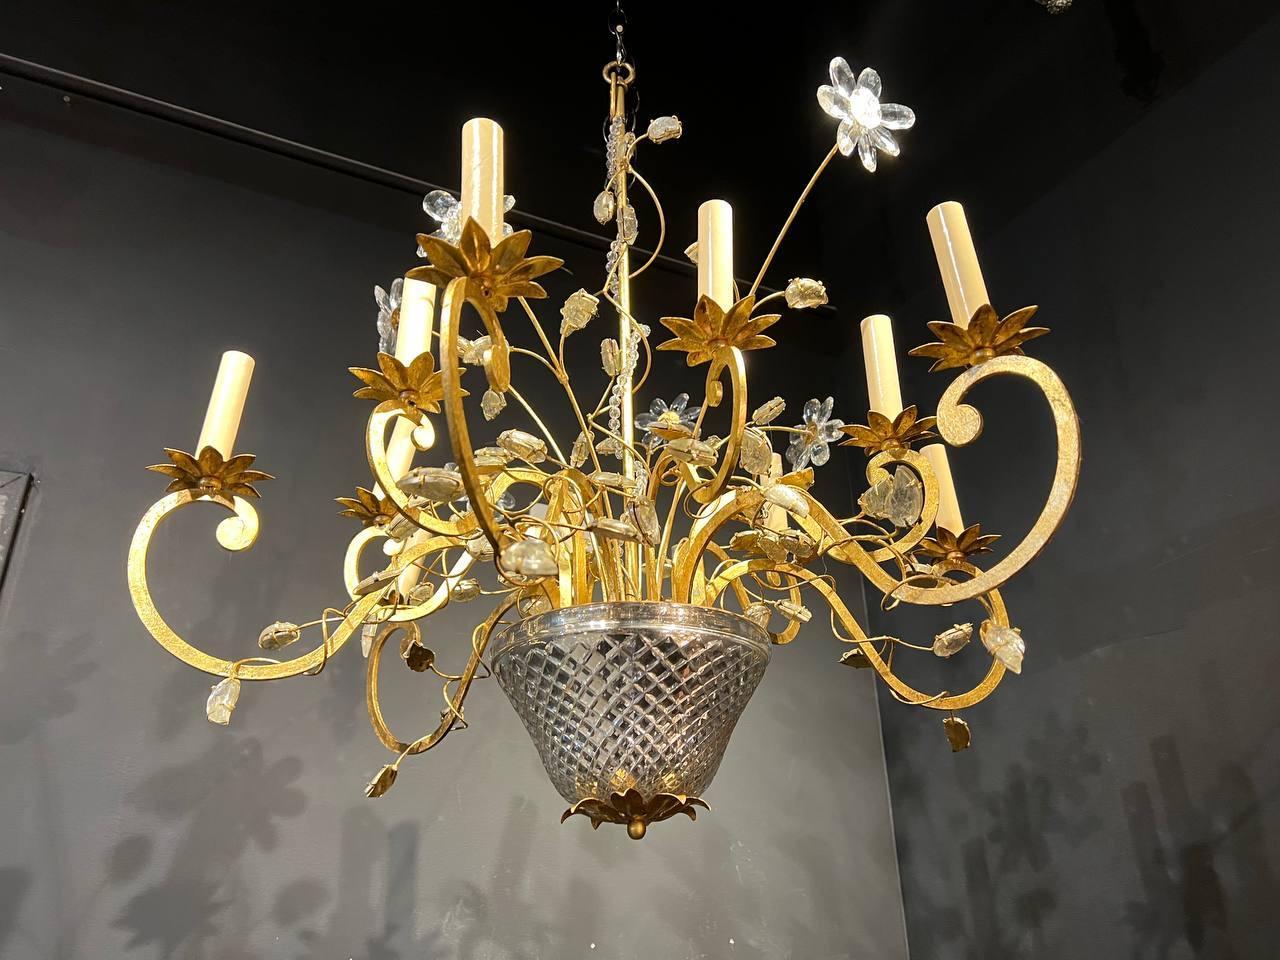 A circa 1930’s French gilt metal 12 lights chandelier with glass leave and body. In great condition.